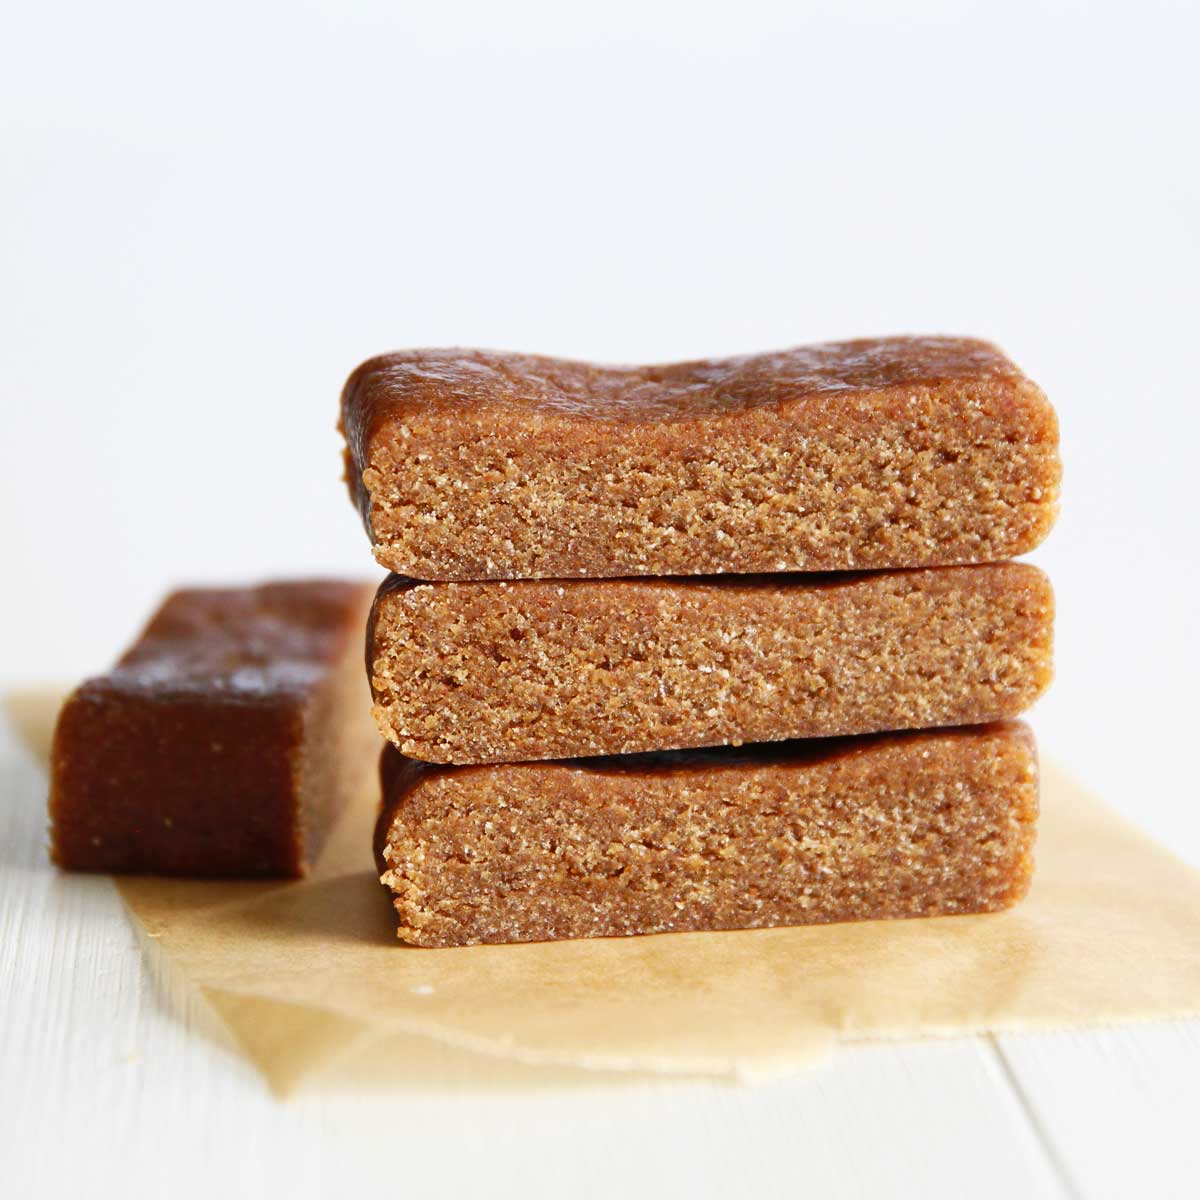 Gingerbread Collagen Protein Bars: a Healthier Festive Snack - PB Fit Protein Bars